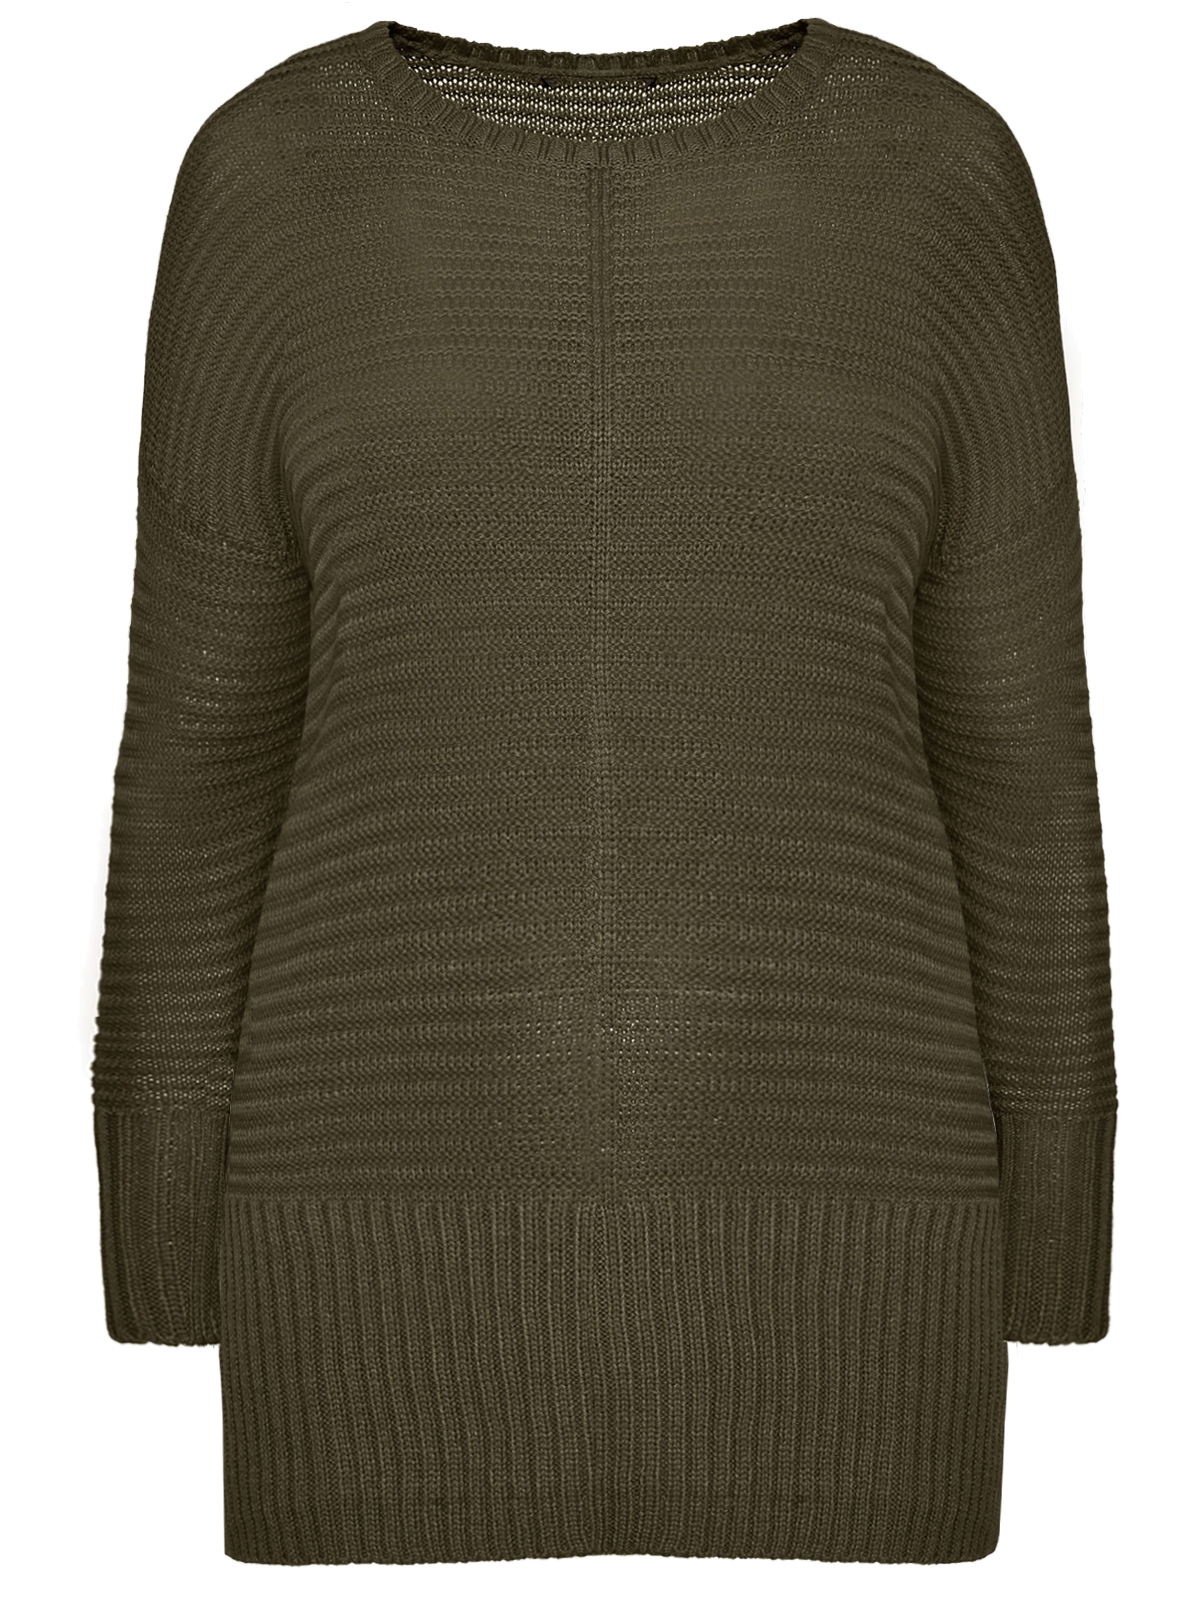 CURVE - - KHAKI Ribbed Knitted Jumper - Plus Size 16 to 30/32